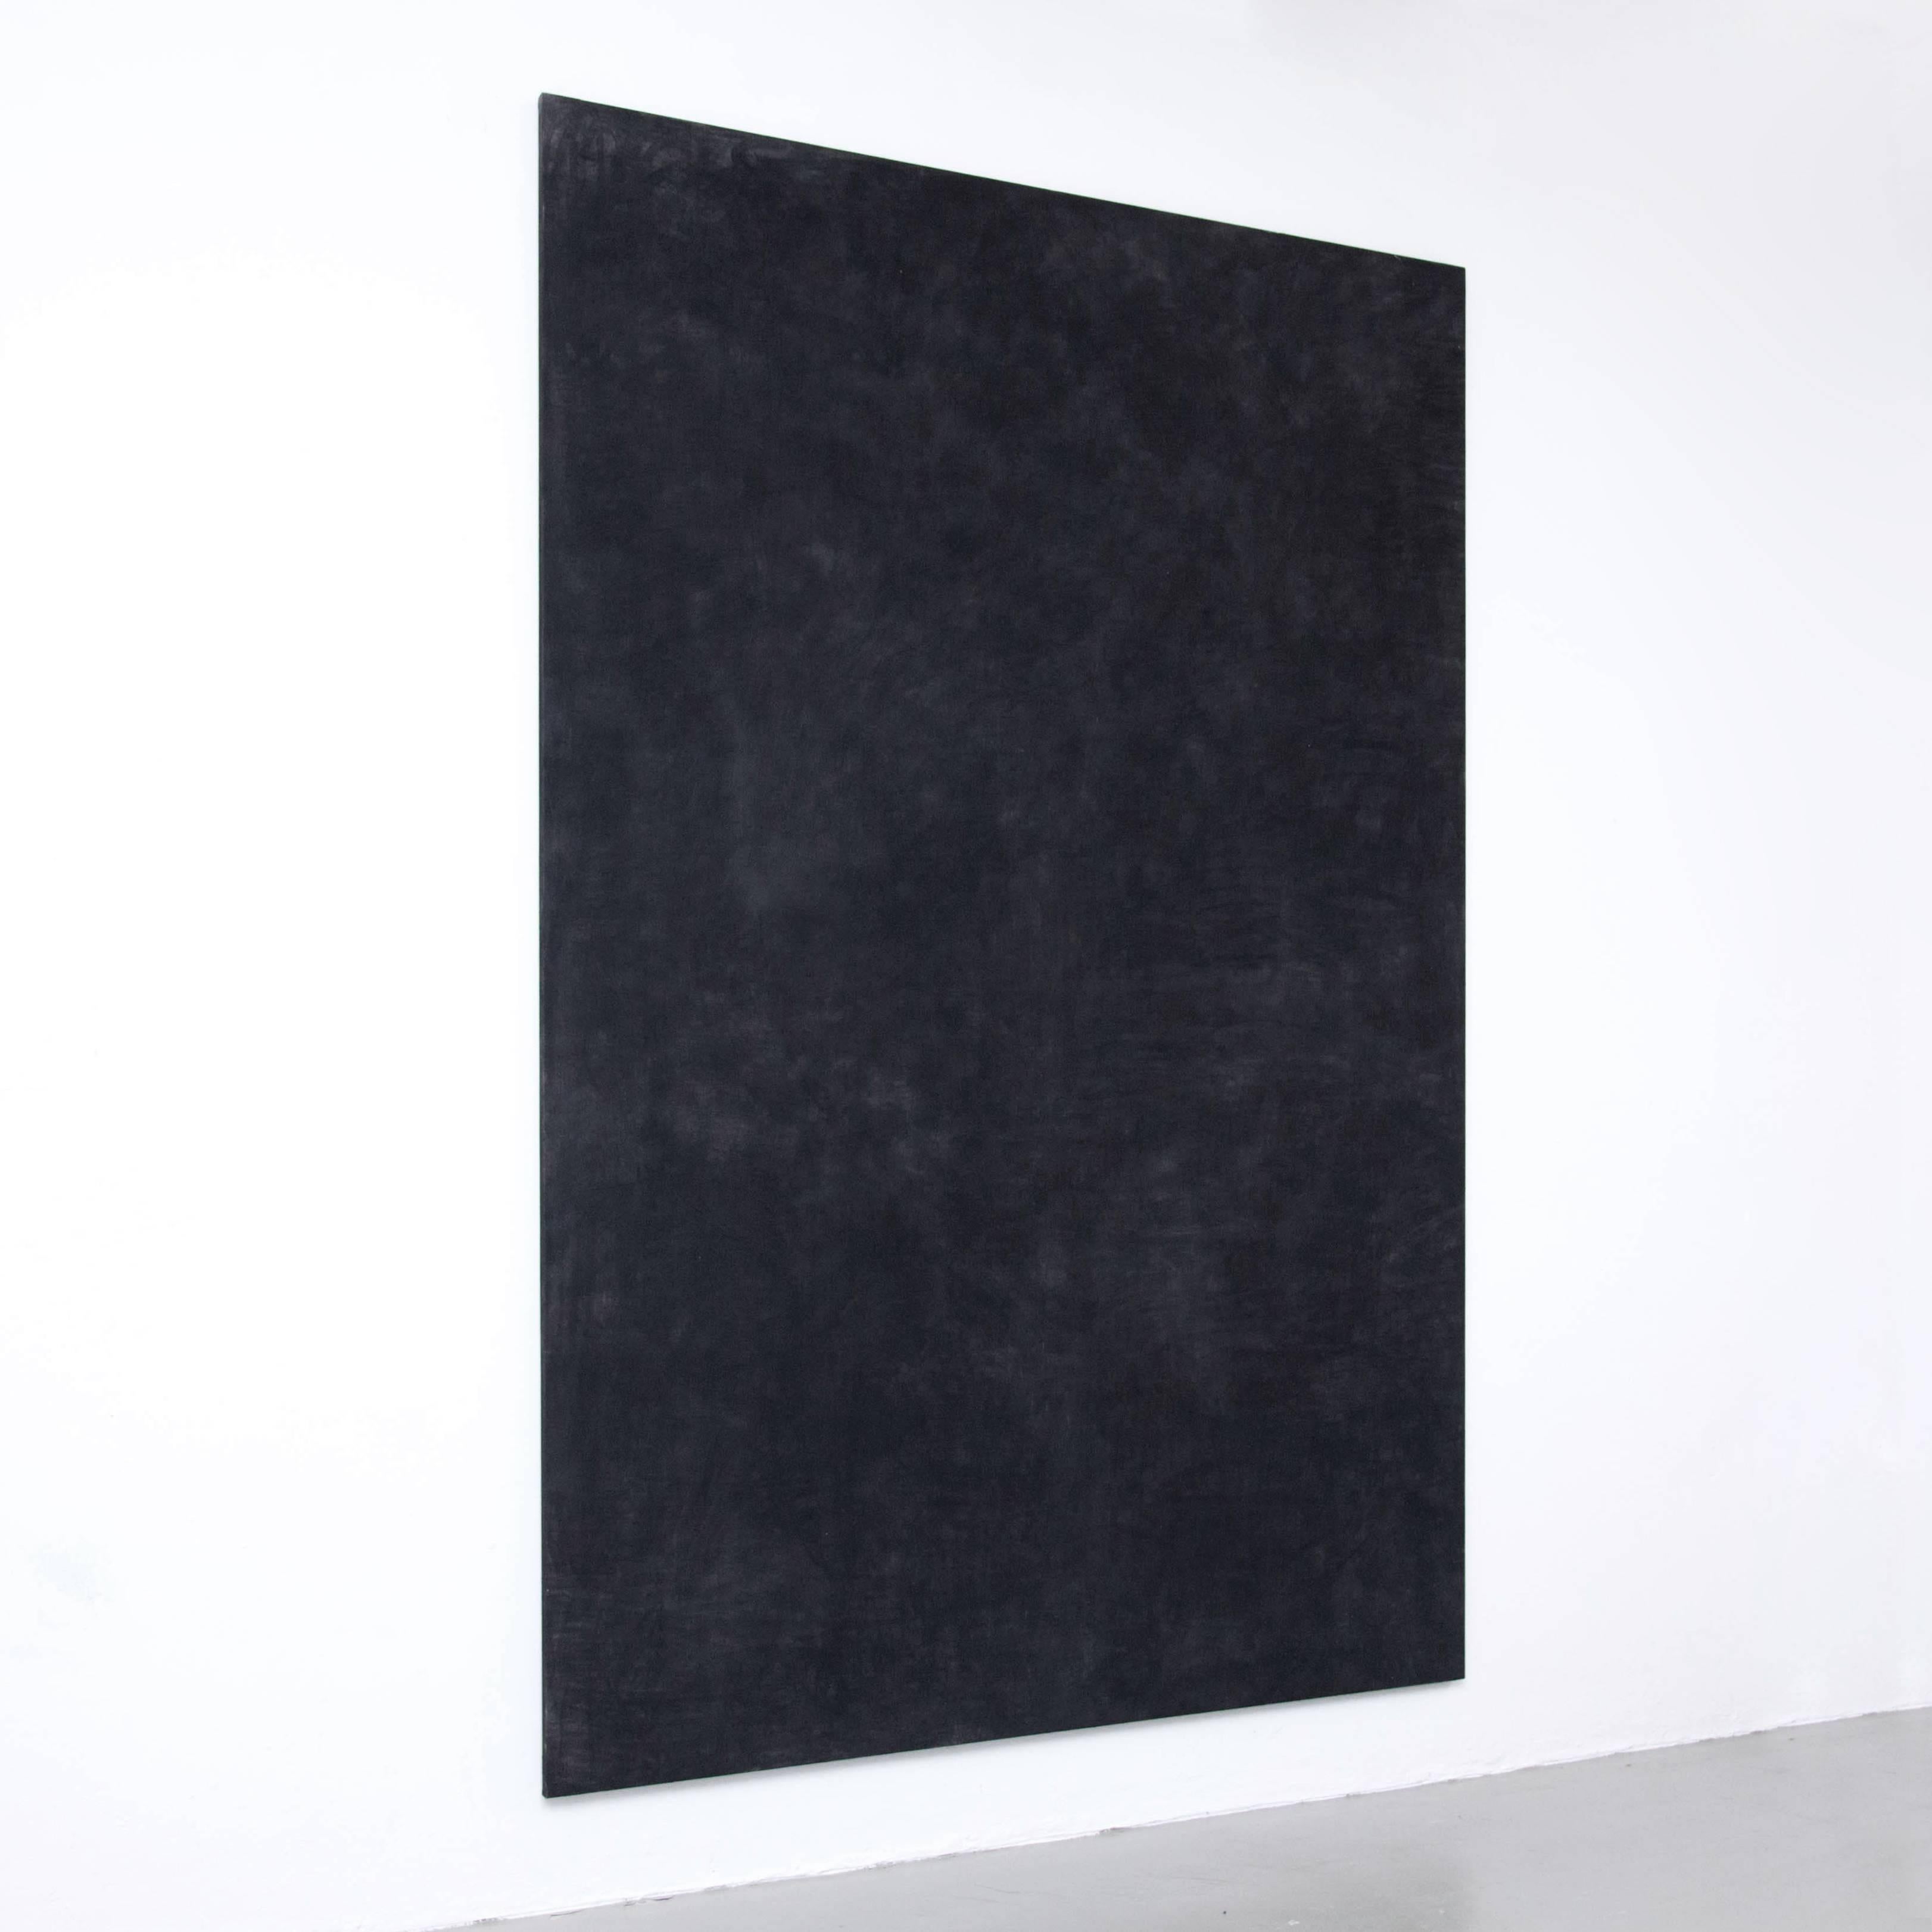 Painting in charcoal on linen made by Enrico Della Torre.
Measures: 300 x 200 cm

The expressive vision of Enrico is an exploration of space in the painting, an attempt to bring to the limits its capacity to be occupied with elements. His